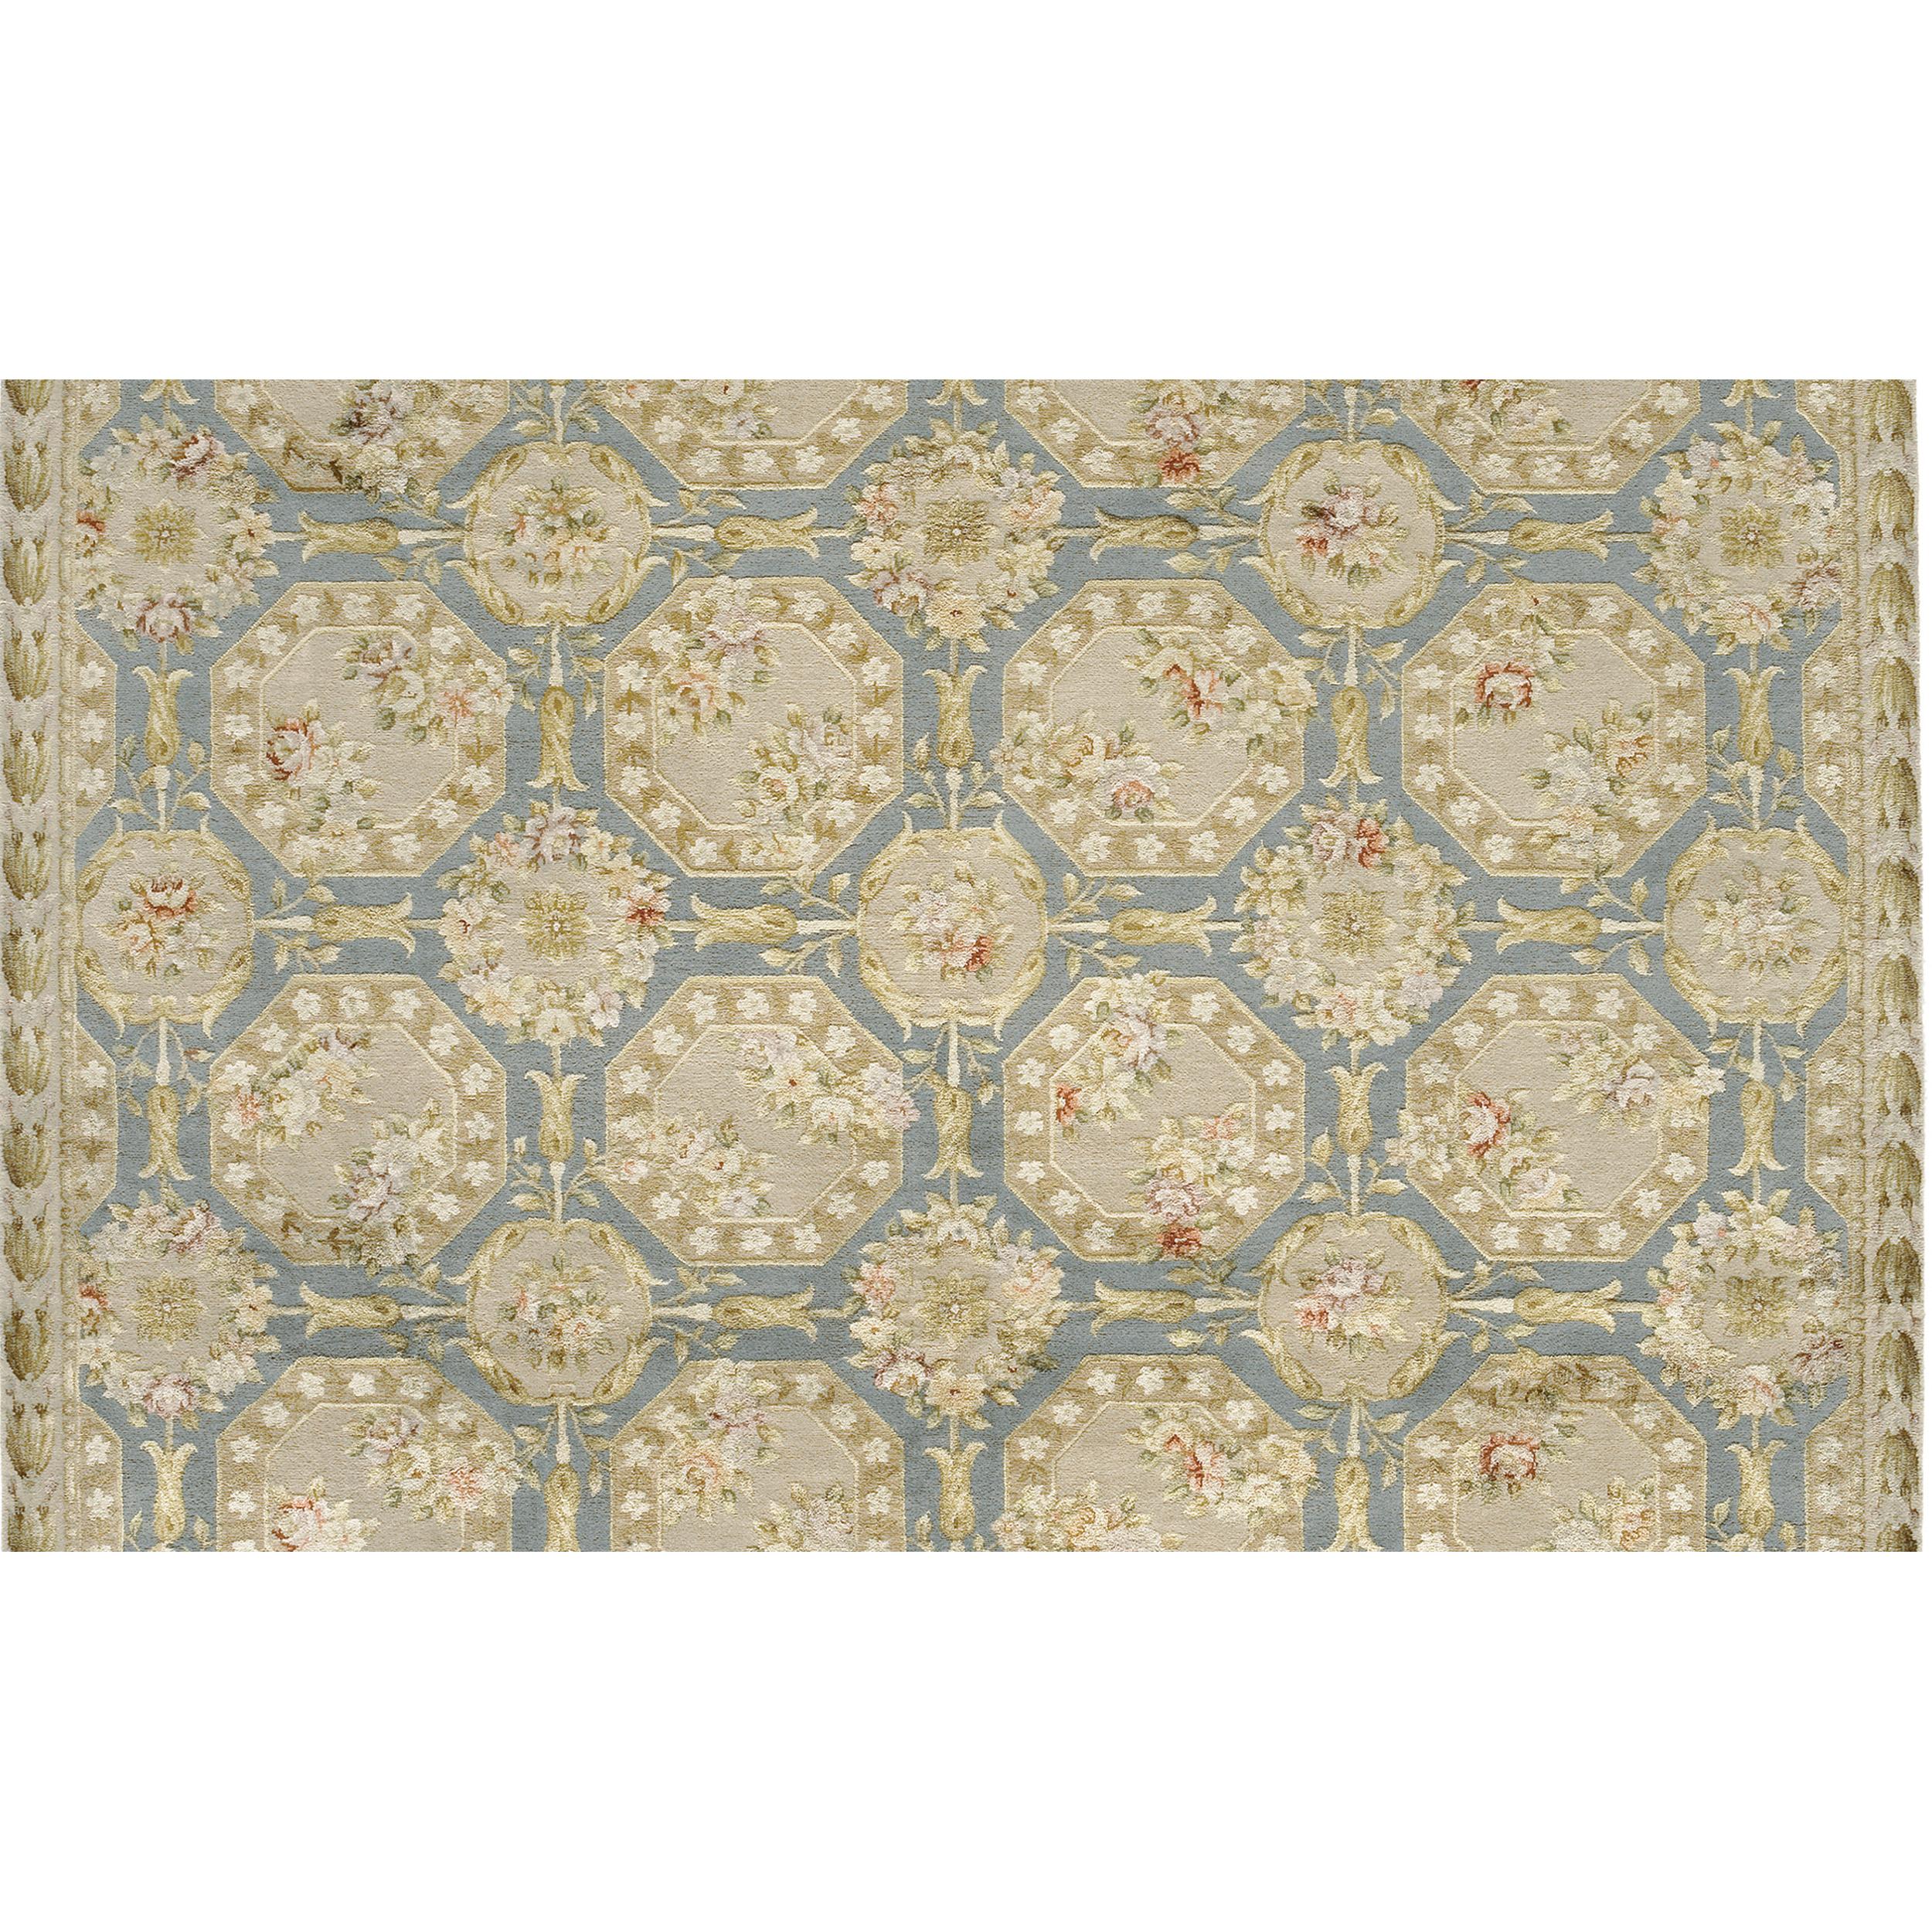 Chinese Luxury European Hand-Knotted Fairfax Sterling & Cream 12x18 Rug For Sale